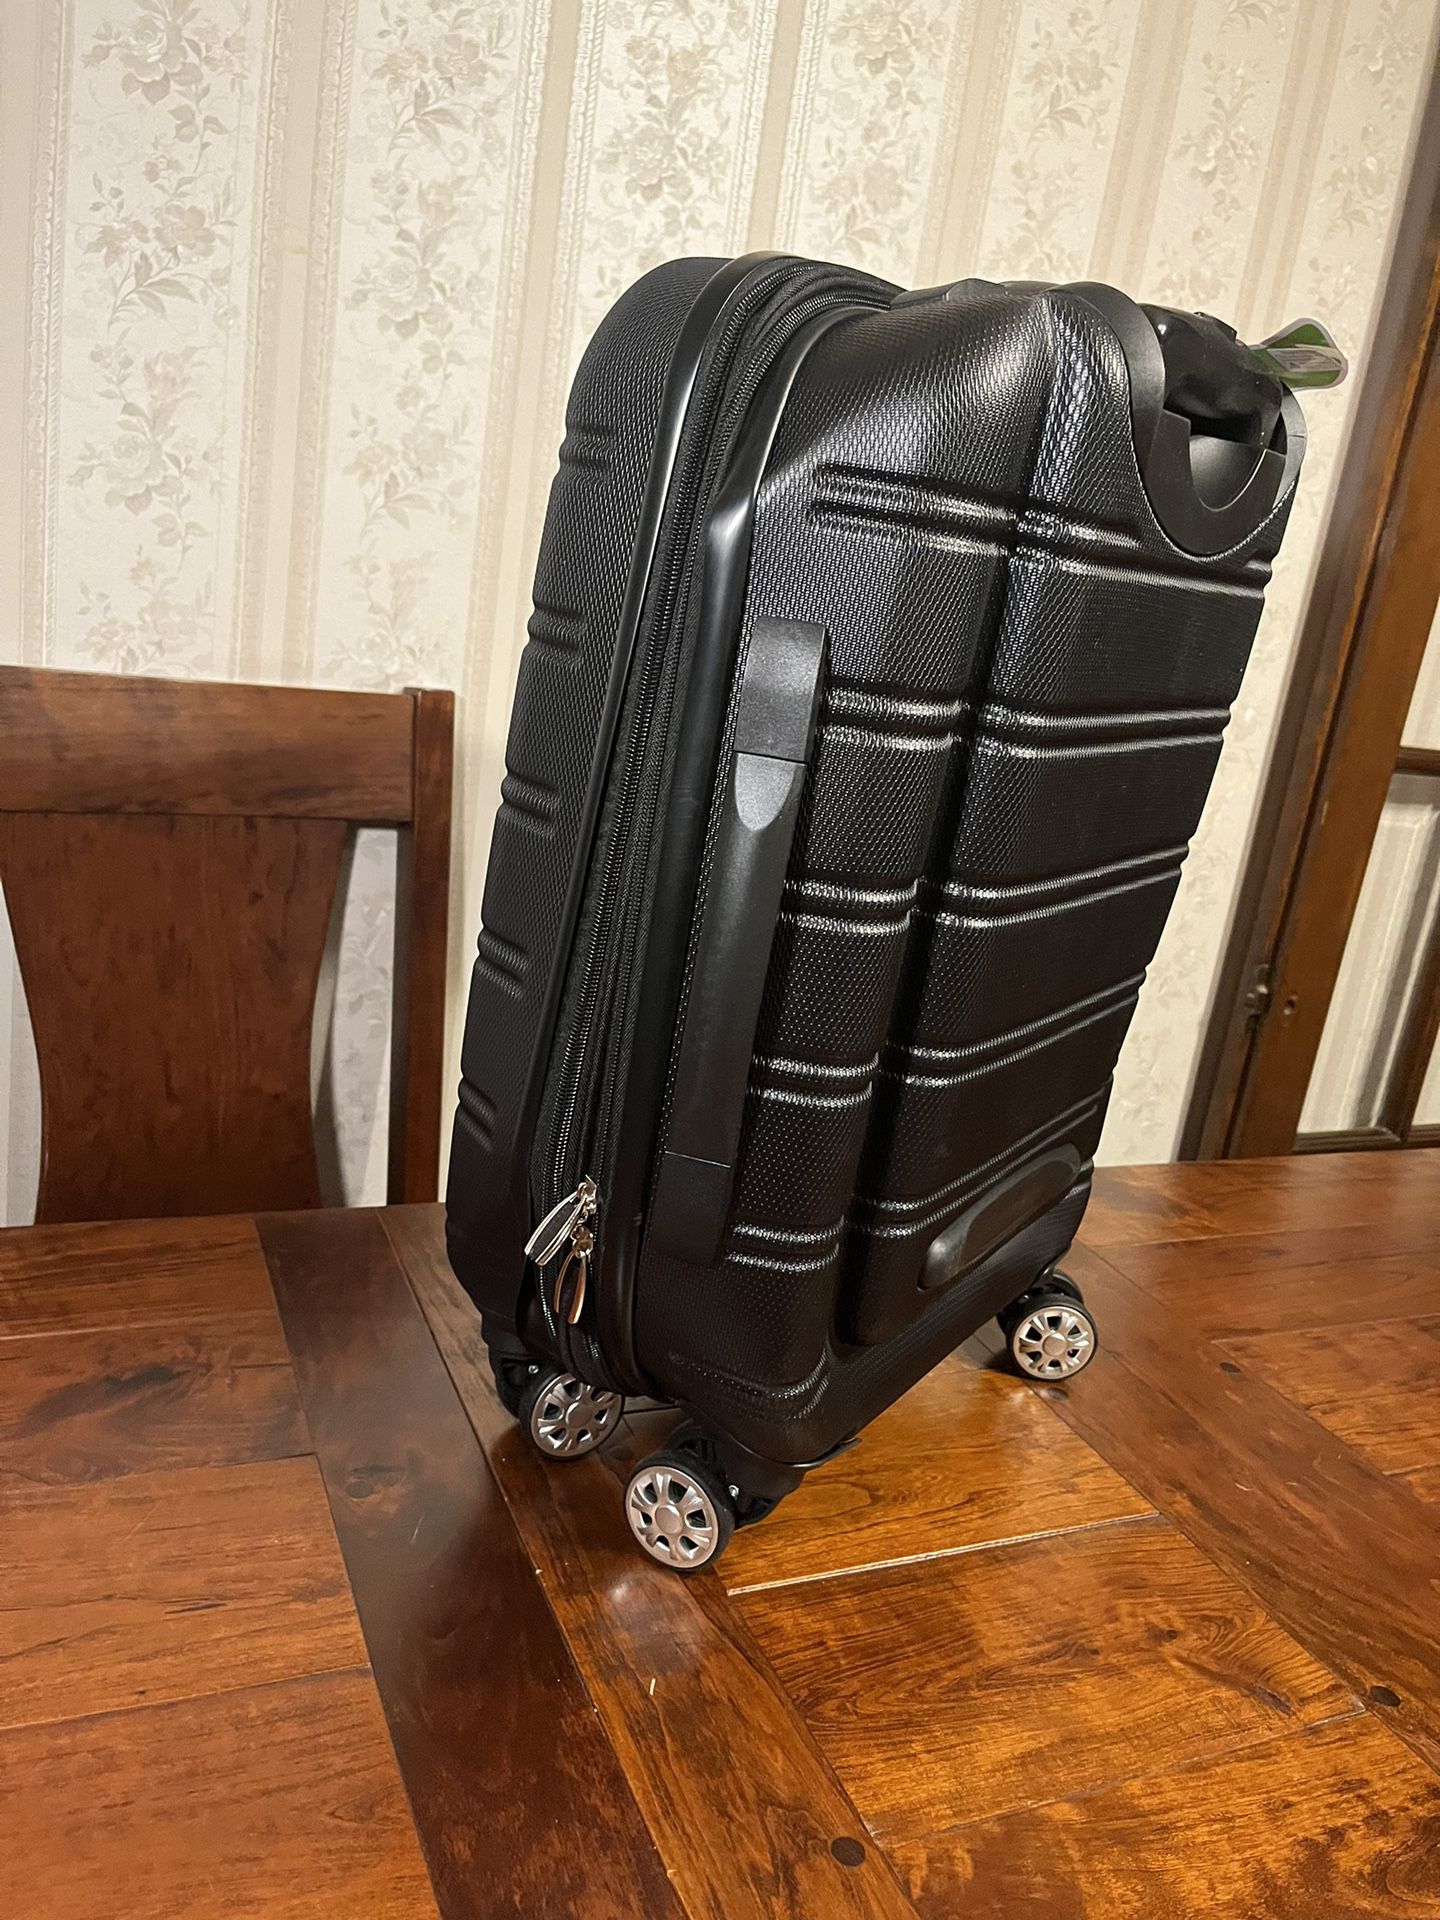 Hardside Expandable Spinner Wheel Luggage, Black, Carry-On 20-Inch 9/10 condition. Never used. 